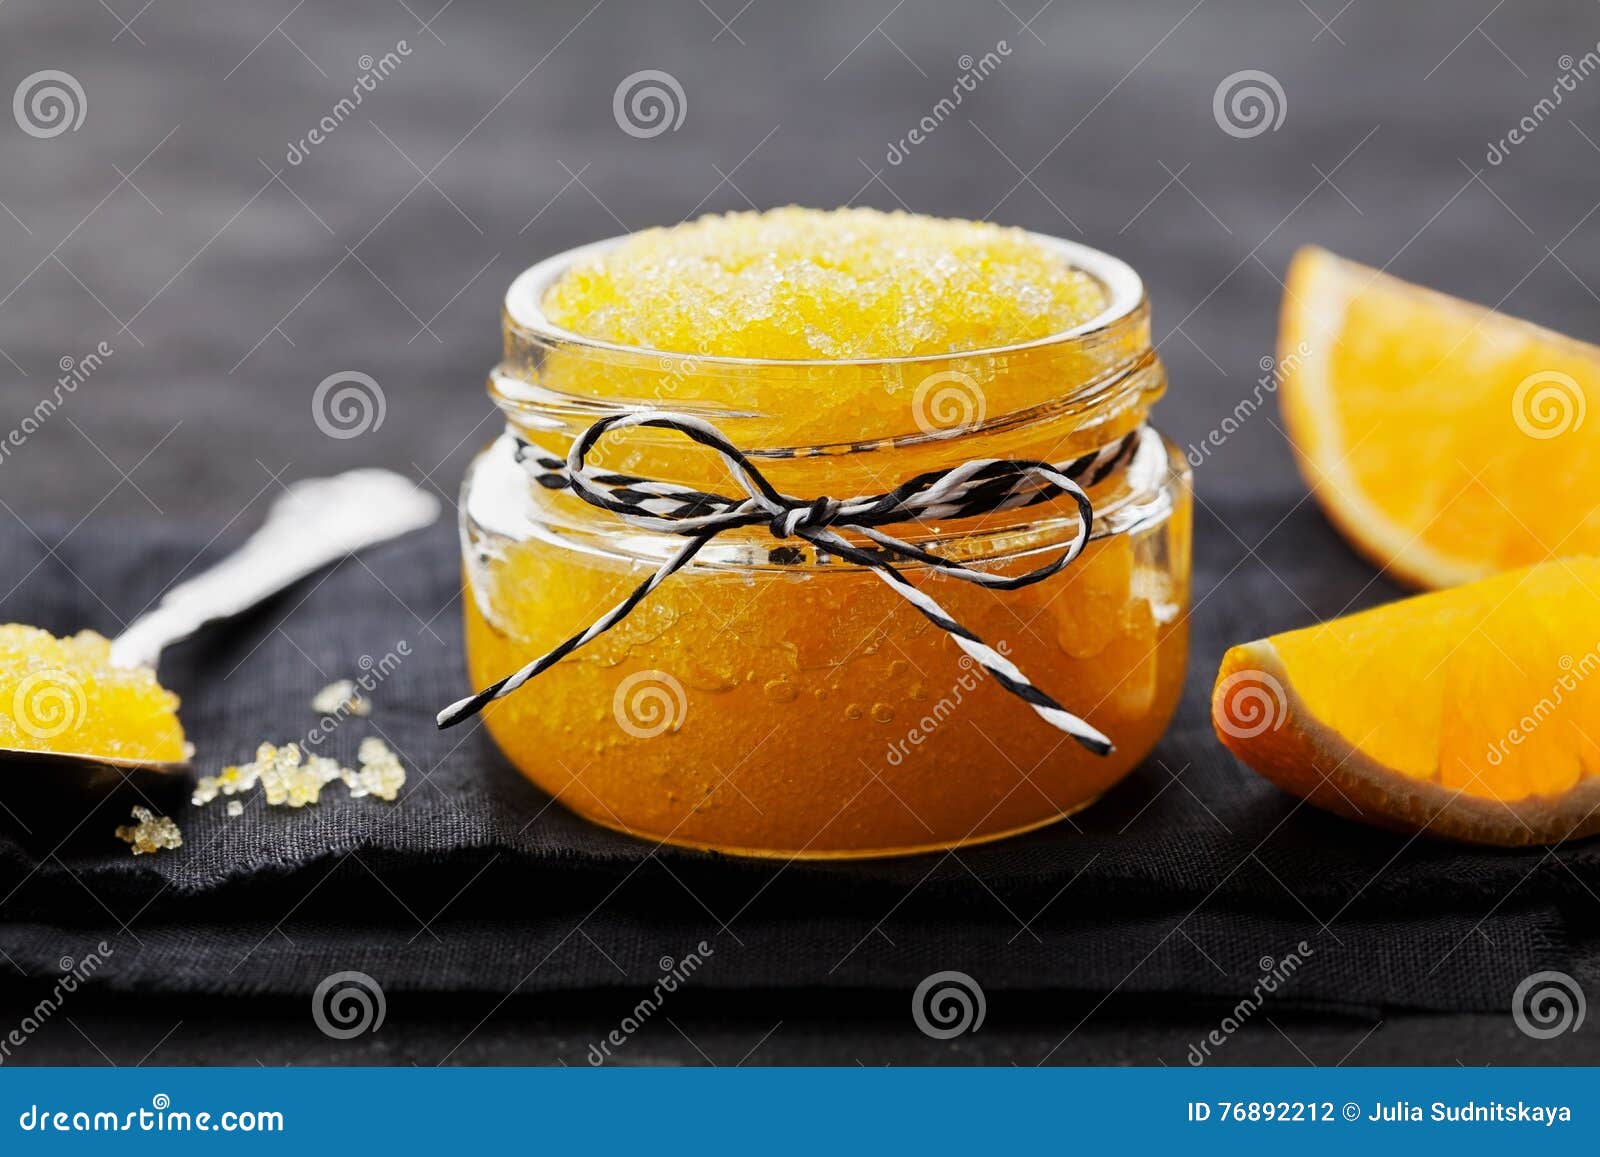 orange body scrub with sugar and coconut oil in glass jar on black table. homemade cosmetic for peeling and spa care